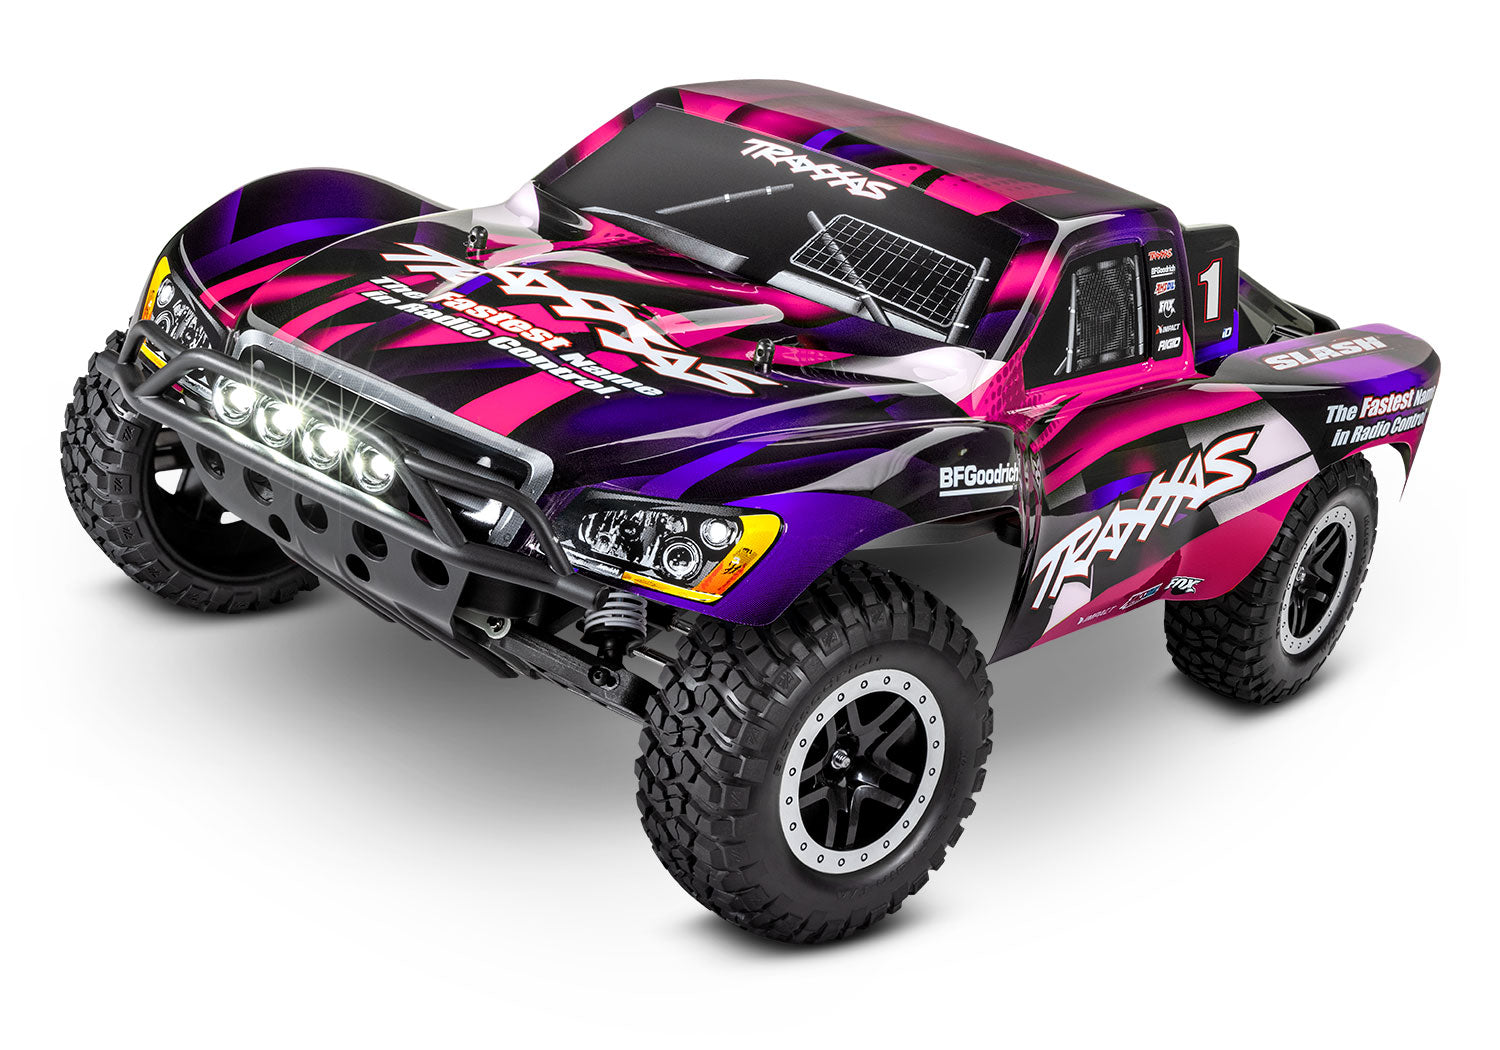 TRAXXAS 58034-61 Slash 1/10 scale waterproof 2WD short course truck. RTR, with TQ™ 2.4GHz radio system, XL-5® Electronic Speed Control, 8.4V NiMH 3000mAh battery, 4-amp DC Charger, LED lighting, and painted body.